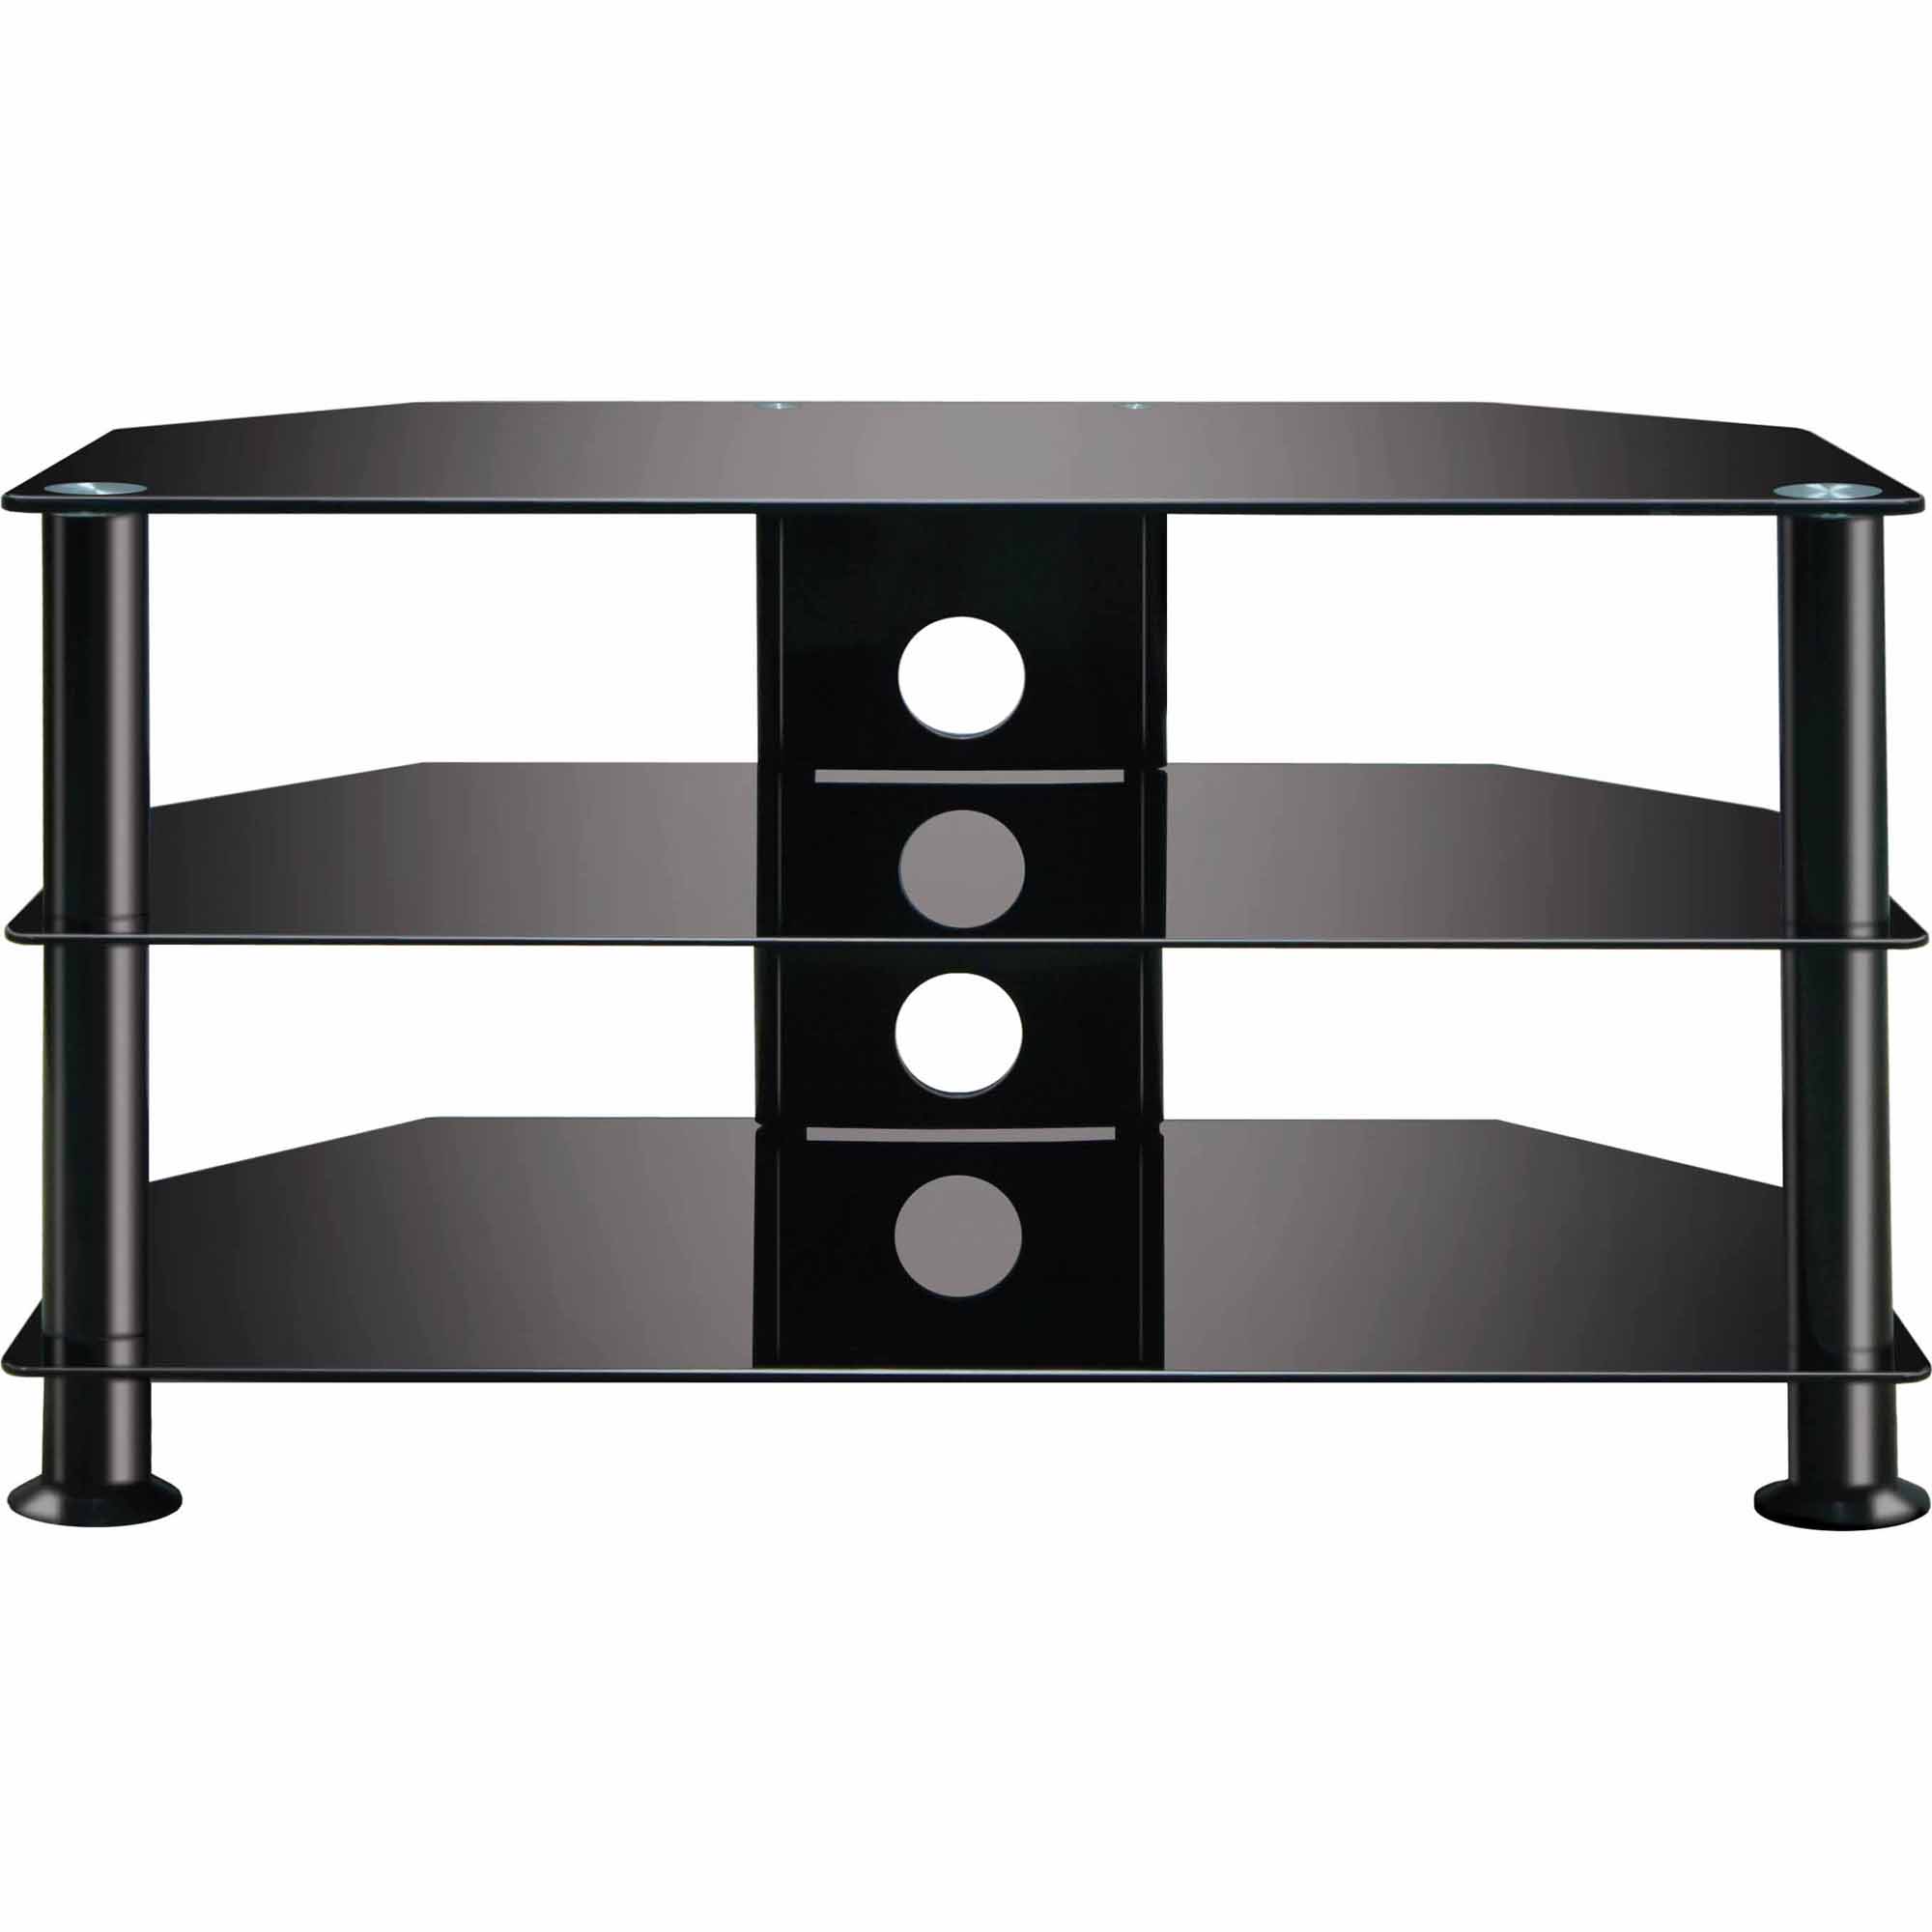 Alphaline™ - A3501 - TV Stand for Flat Panel TVs up to 42 ...